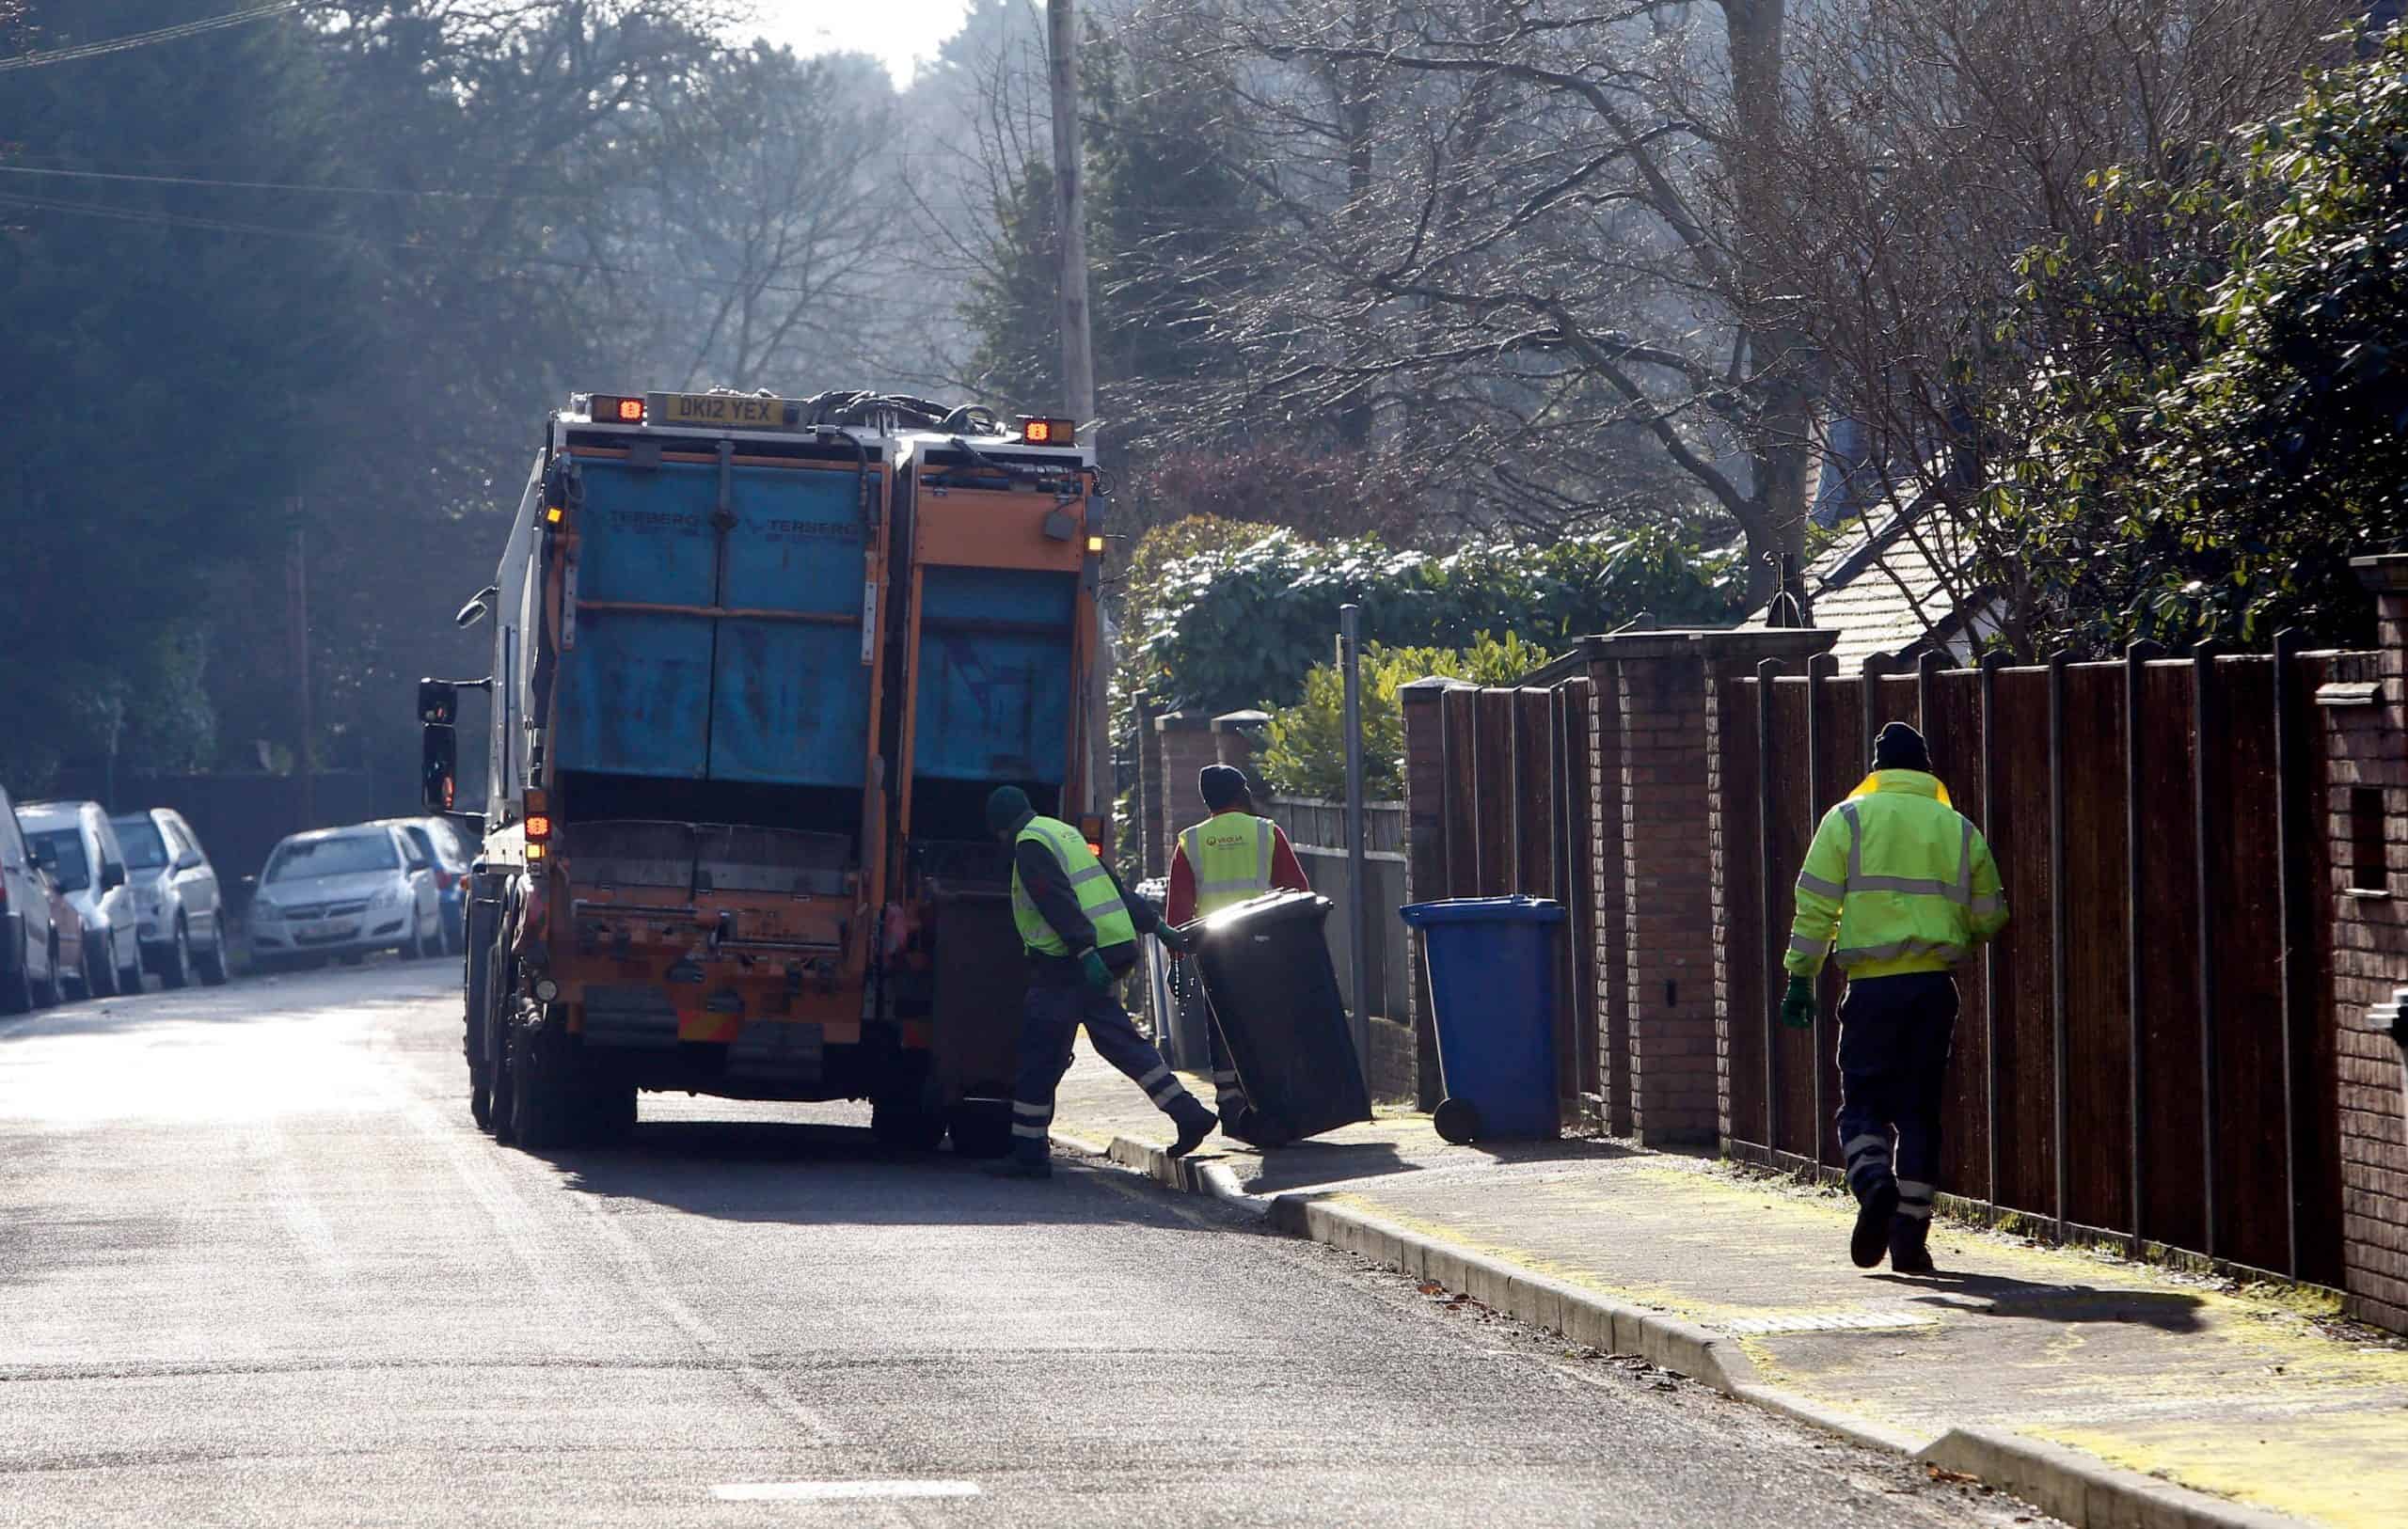 Bin collection shortage: Councils plead to relax immigration rules to ensure collections continue